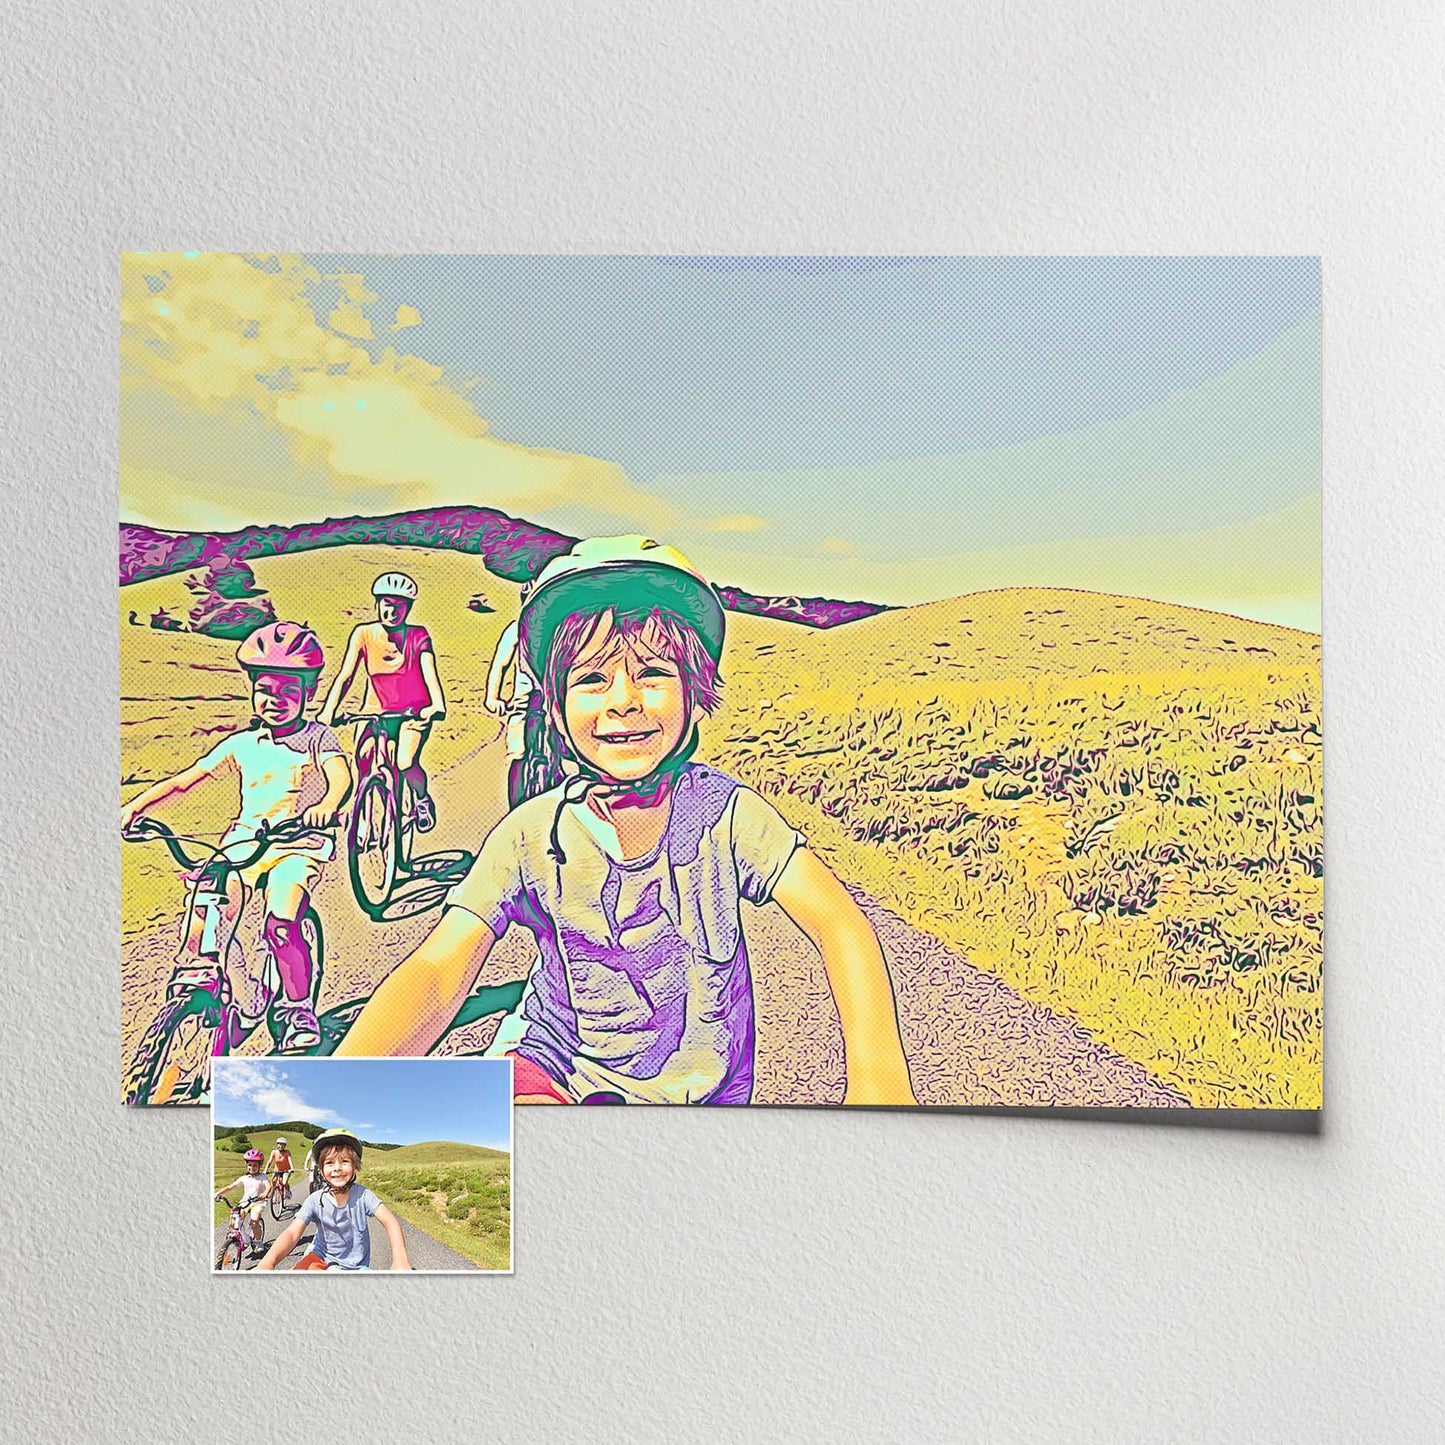 Transform your cherished photo into a Personalised Blue & Yellow Cartoon Print that exudes whimsical charm. With its halftone effect and a delightful combination of yellow, blue, and purple hues, this artwork radiates a joyful and cheerful vibe